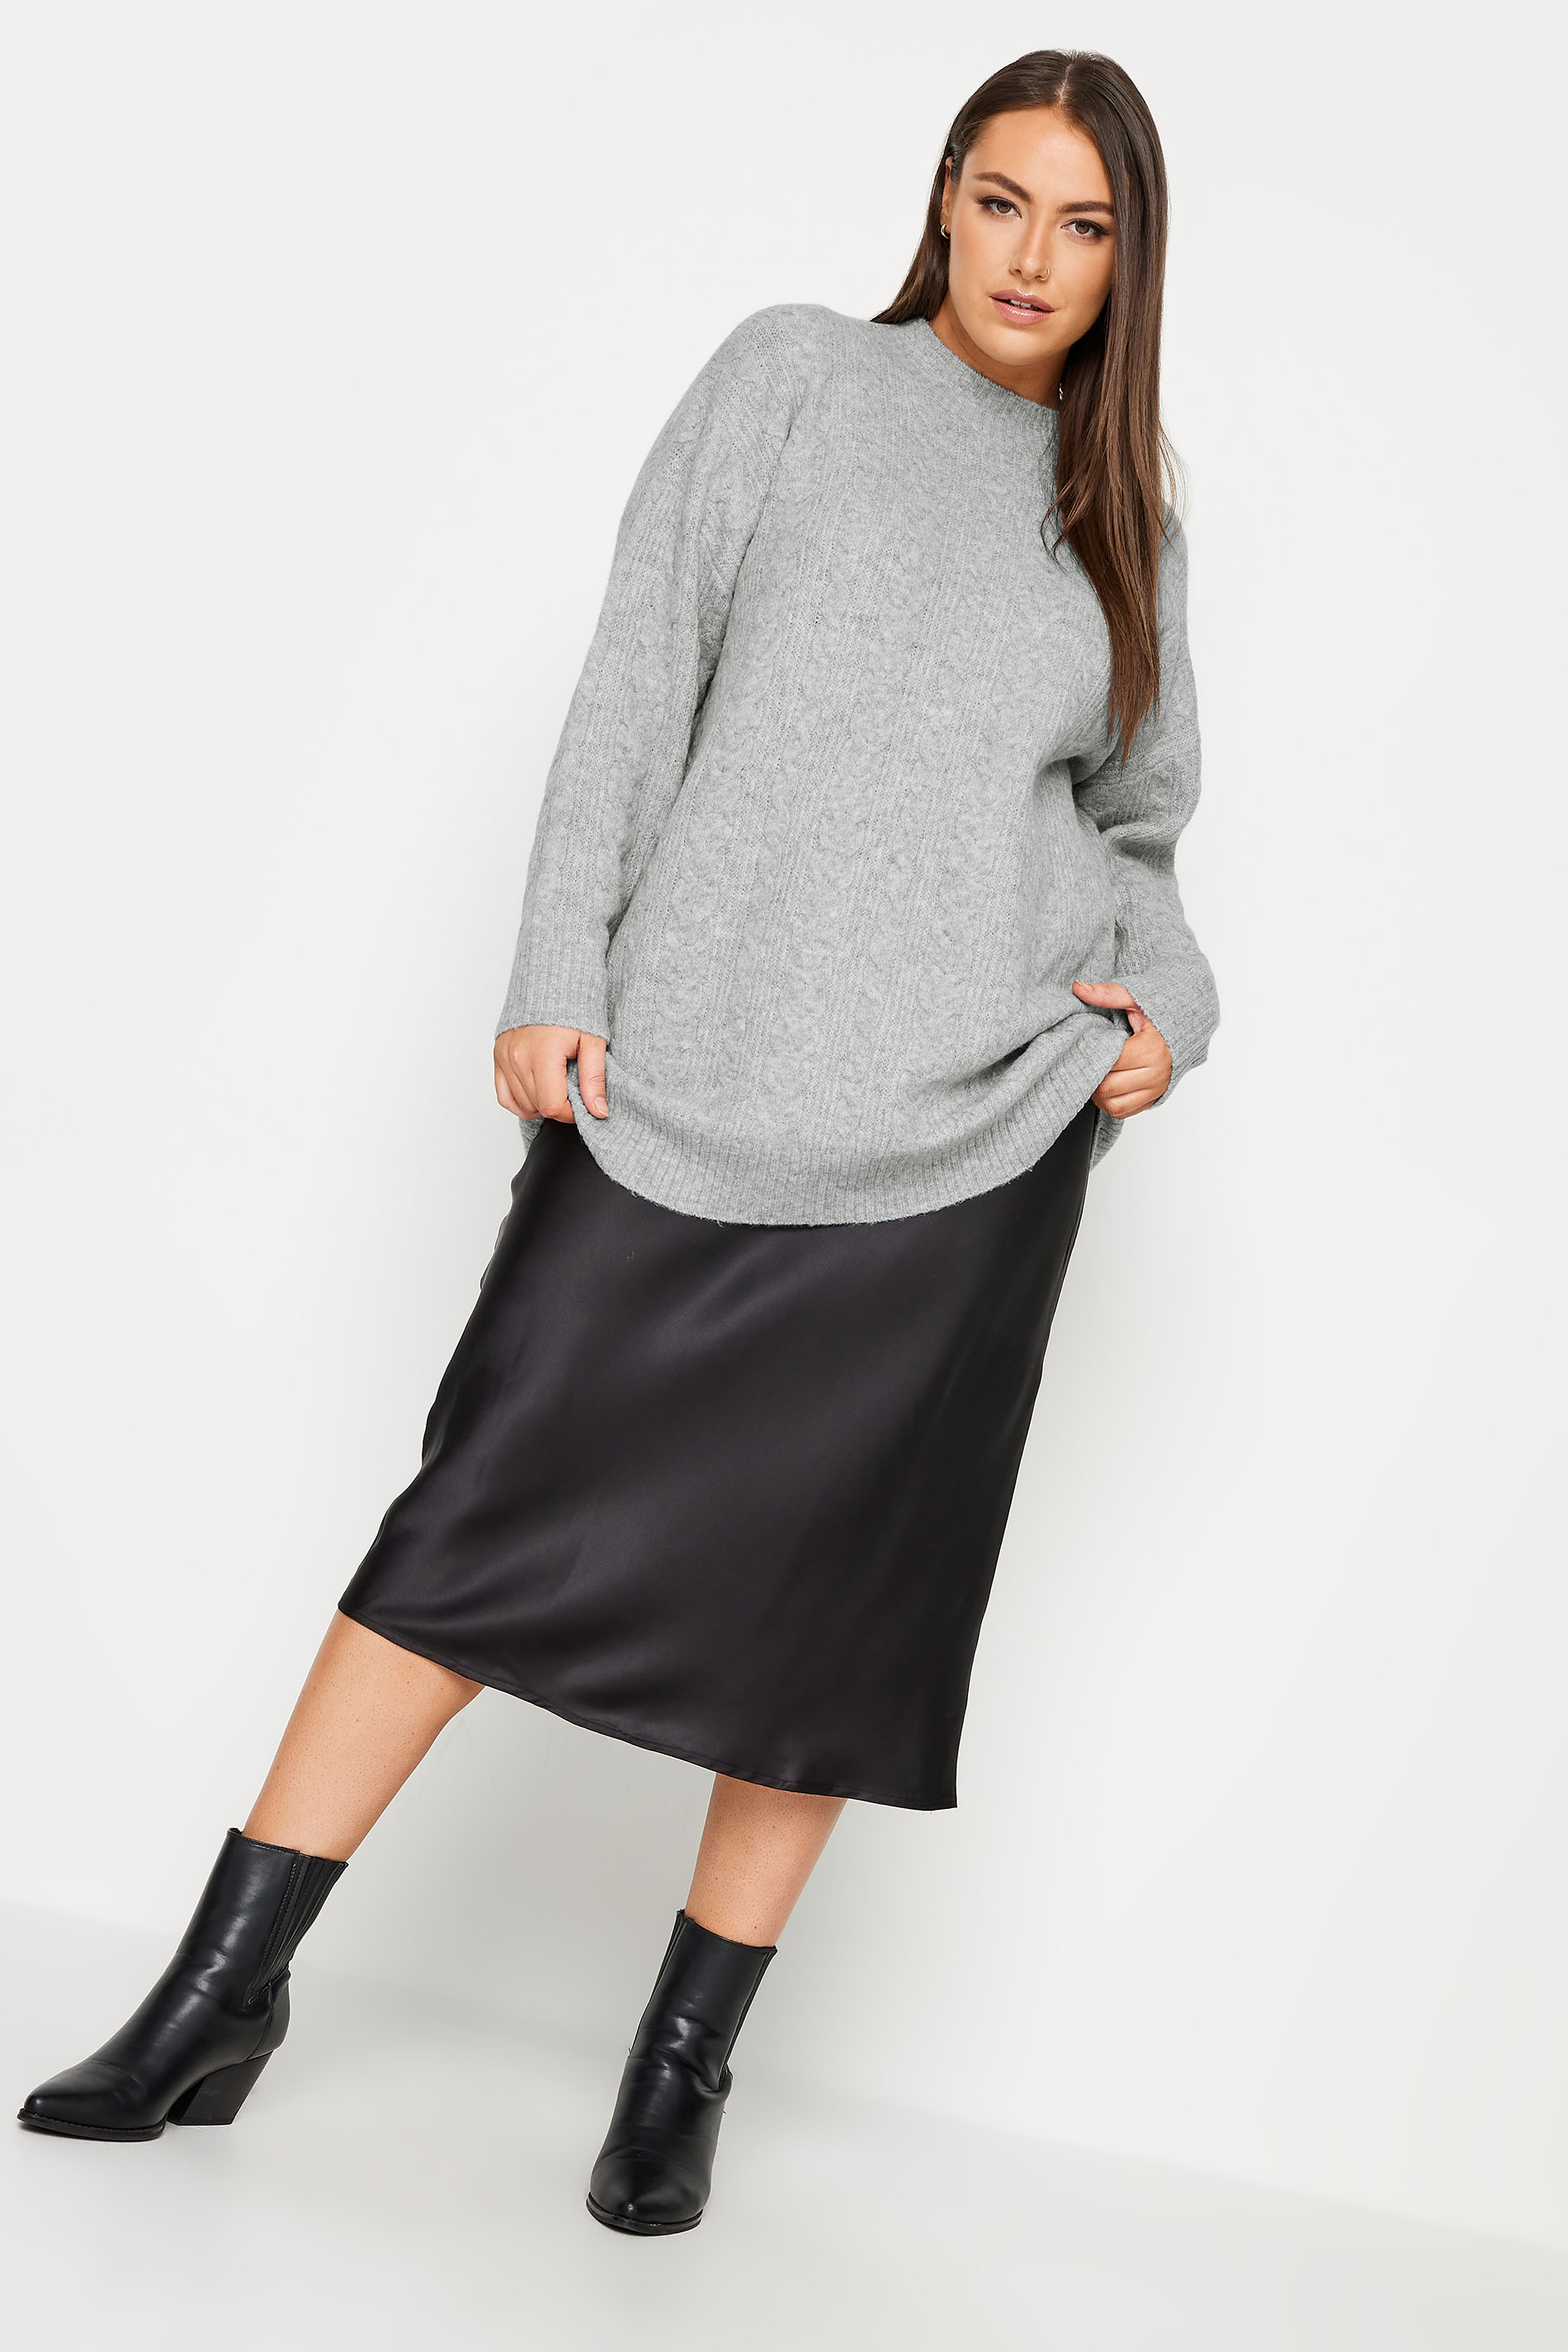 YOURS Plus Size Grey Cable Knit Turtle Neck Jumper | Yours Clothing 2